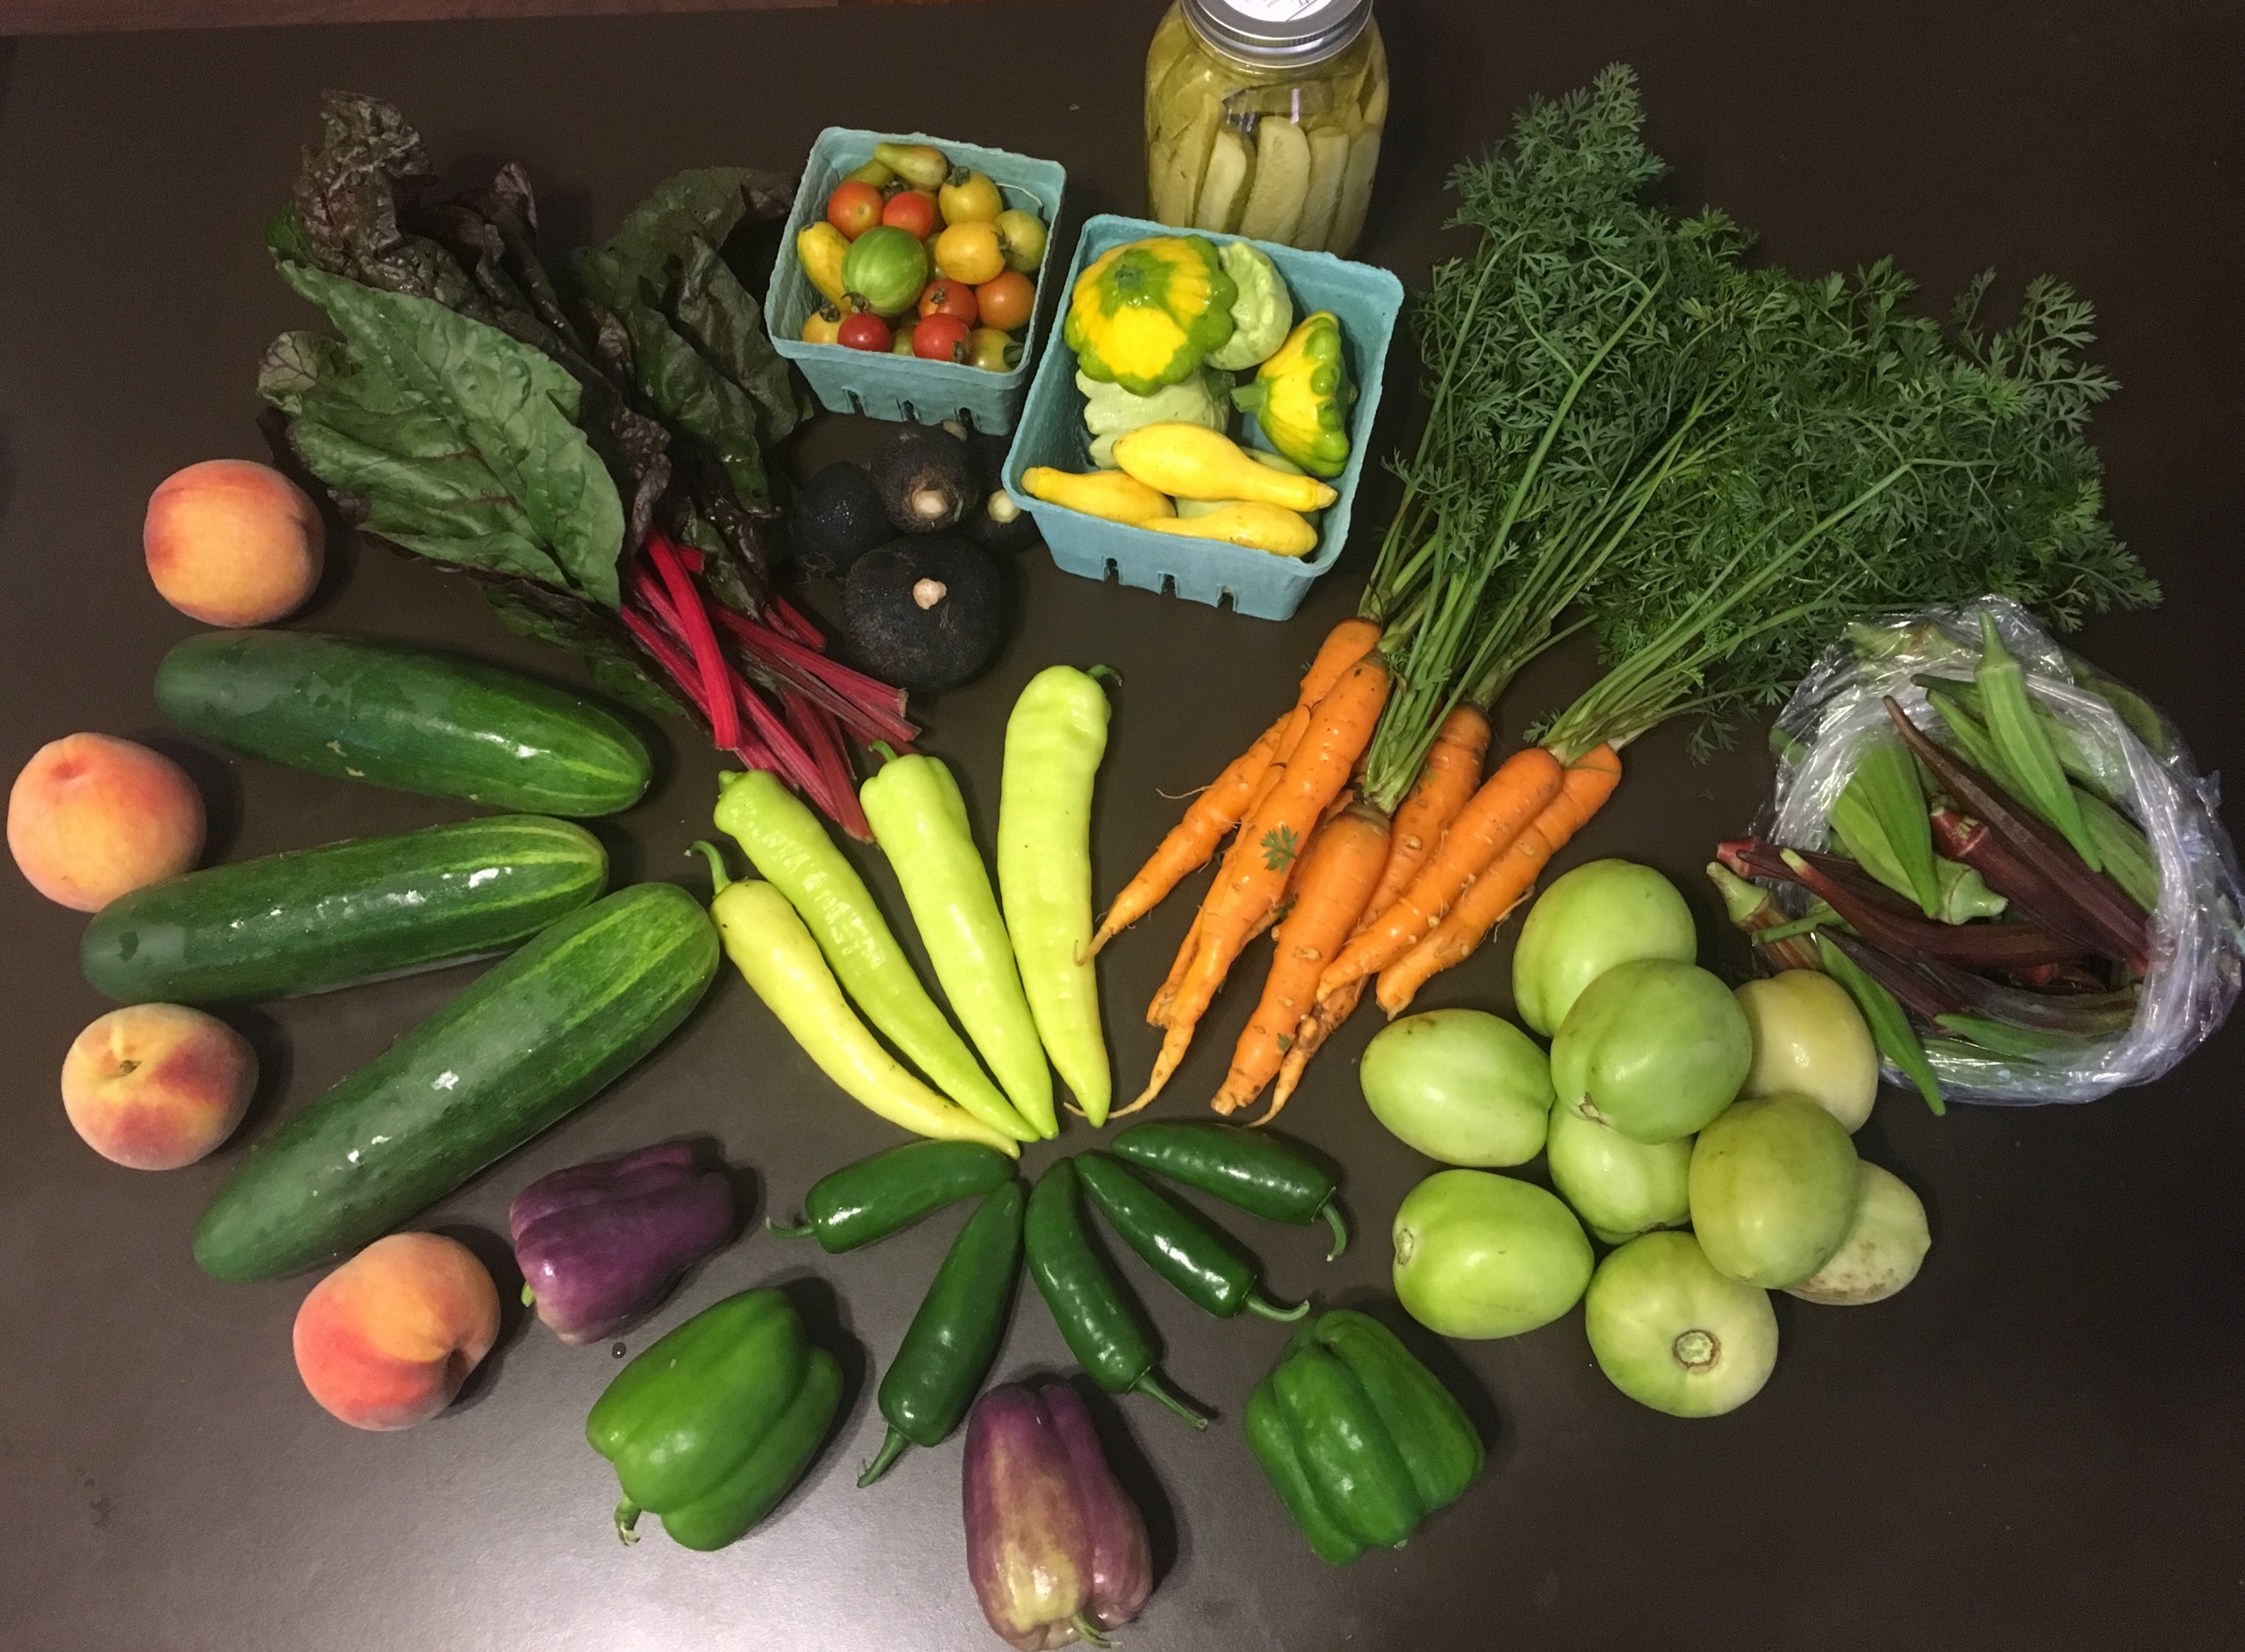  &nbsp;Peaches, slicing cucumbers, Swiss chard, black radishes, cherry tomatoes, assorted squash, pickles, carrots, okra, banana peppers, jalapeños, purple and green bell peppers, green tomatoes.&nbsp; 